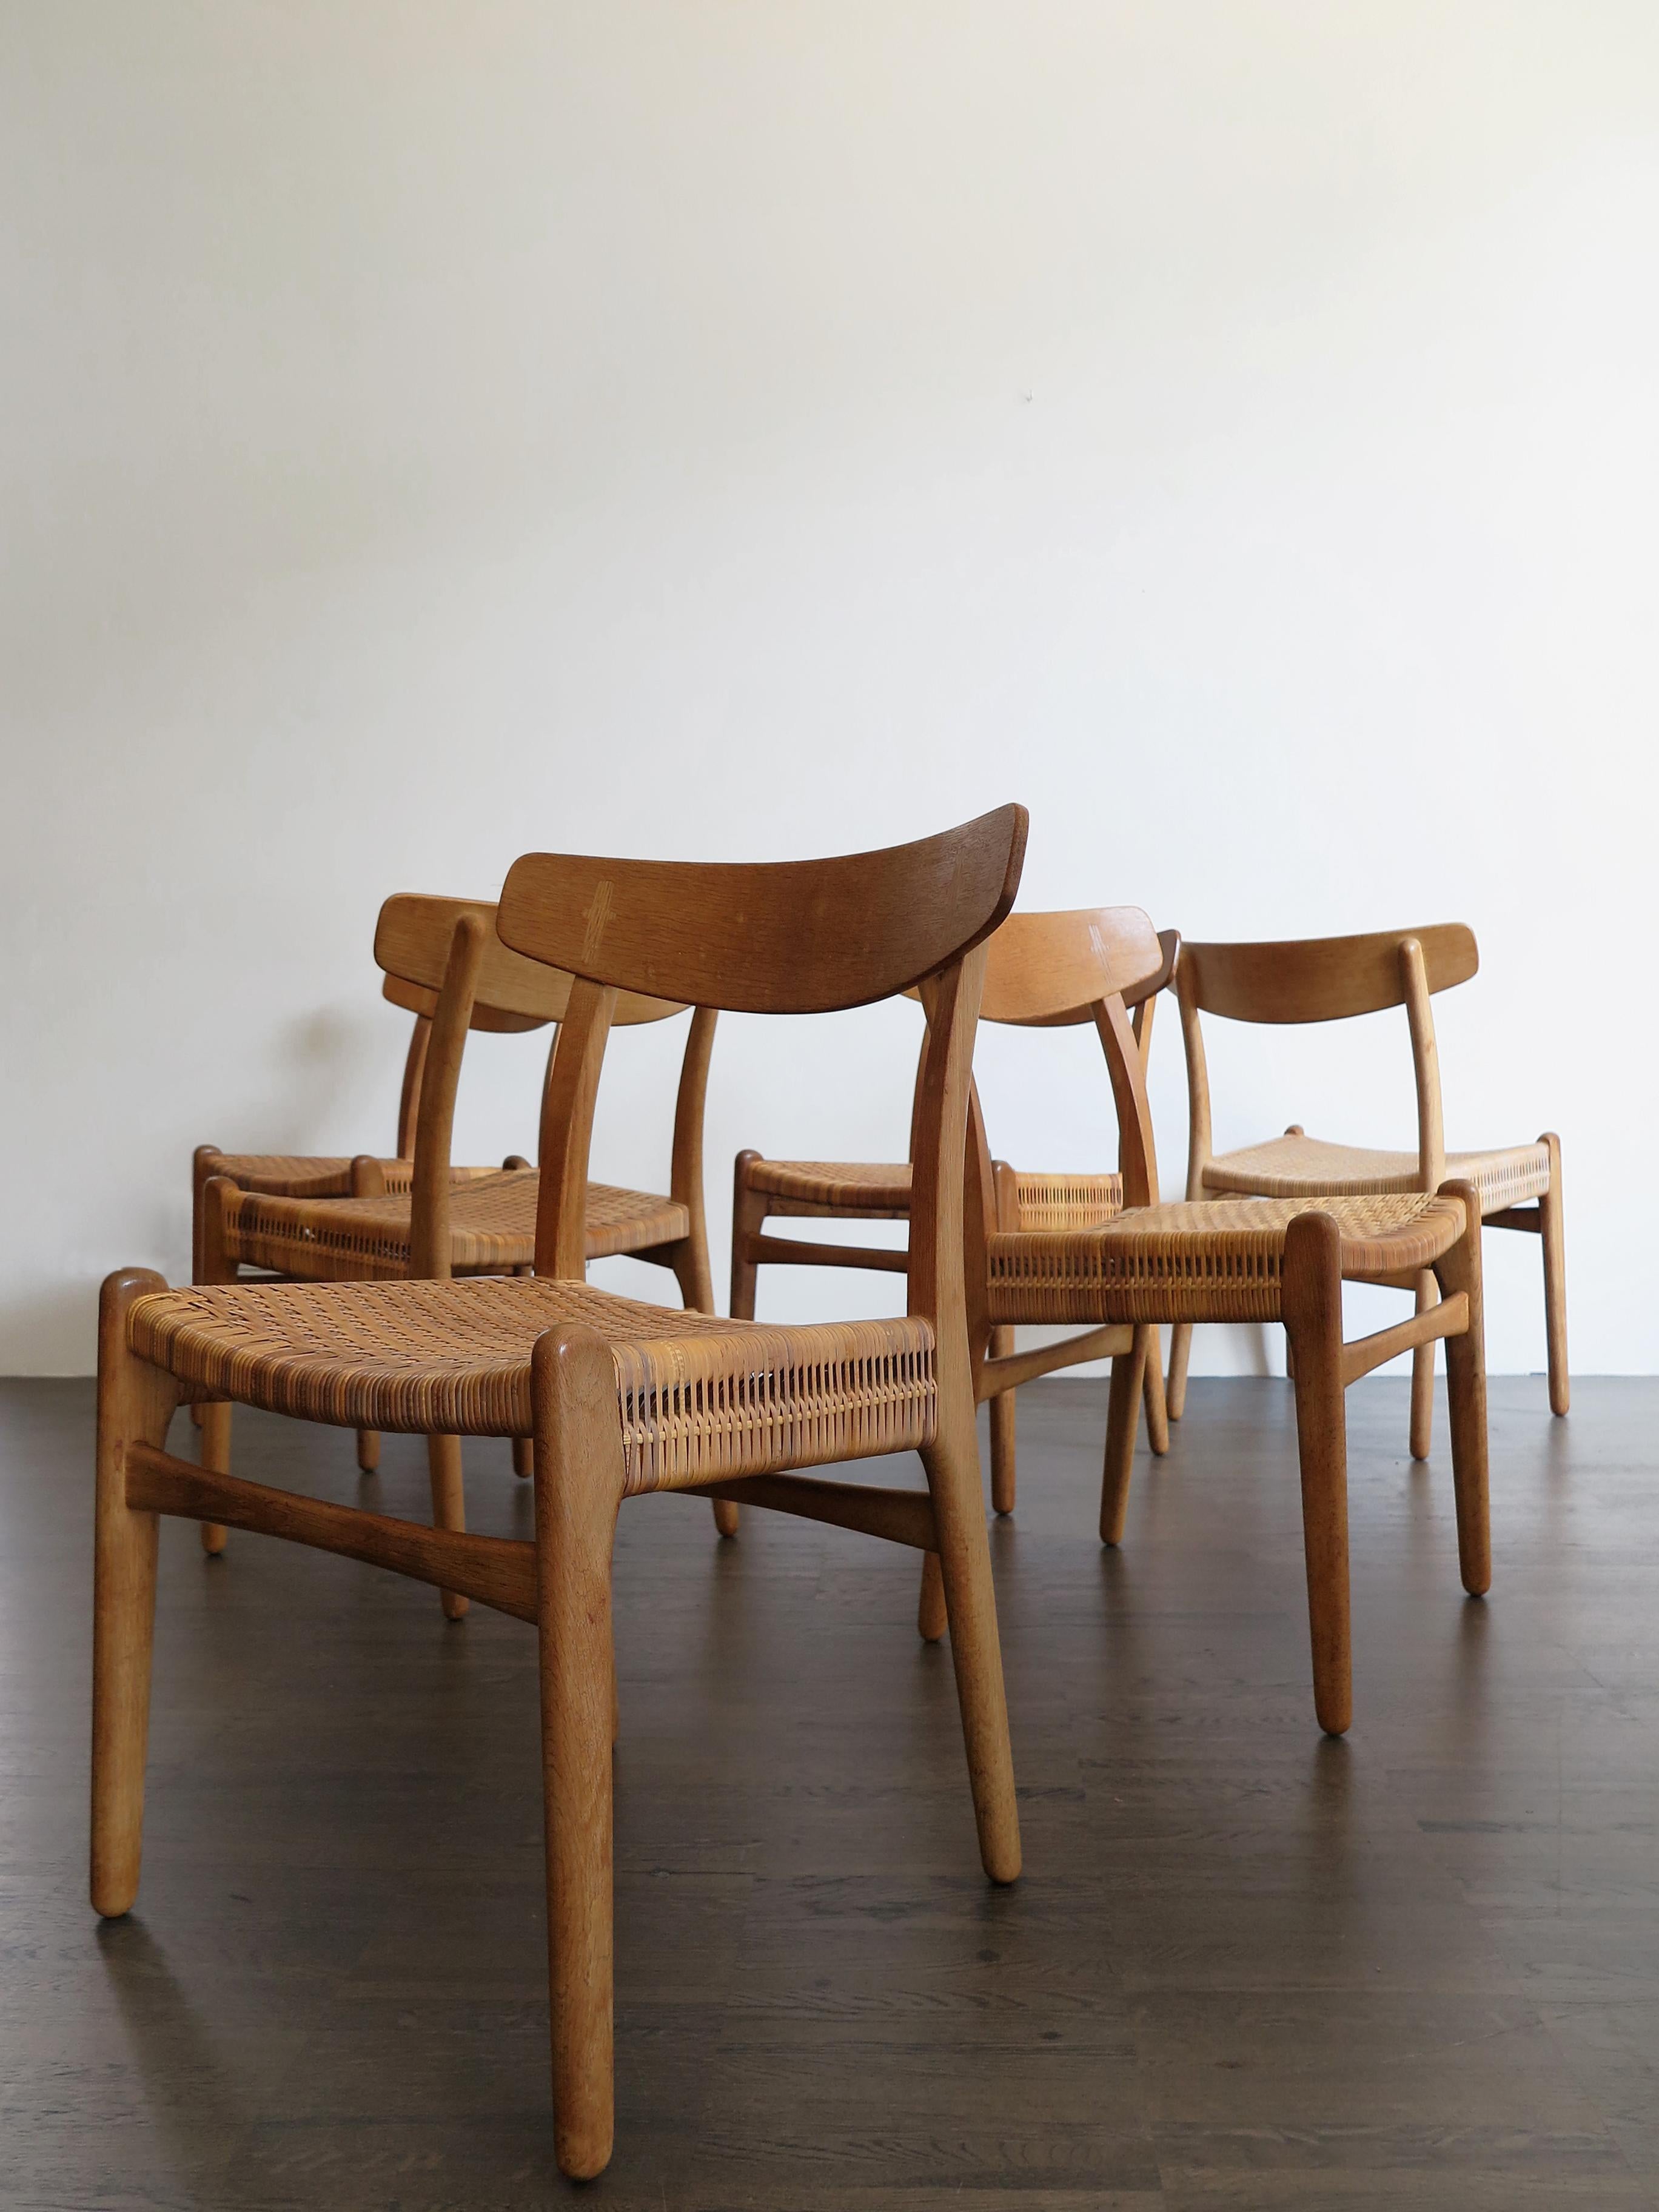 Set of six Scandinavian Mid-Century Modern design original dining chirs model CH23 designed by Hans Wegner and produced by Carl Hansen & Soon in Odense, rare model with oak and teak structure and original braid ratan cane, Denmark